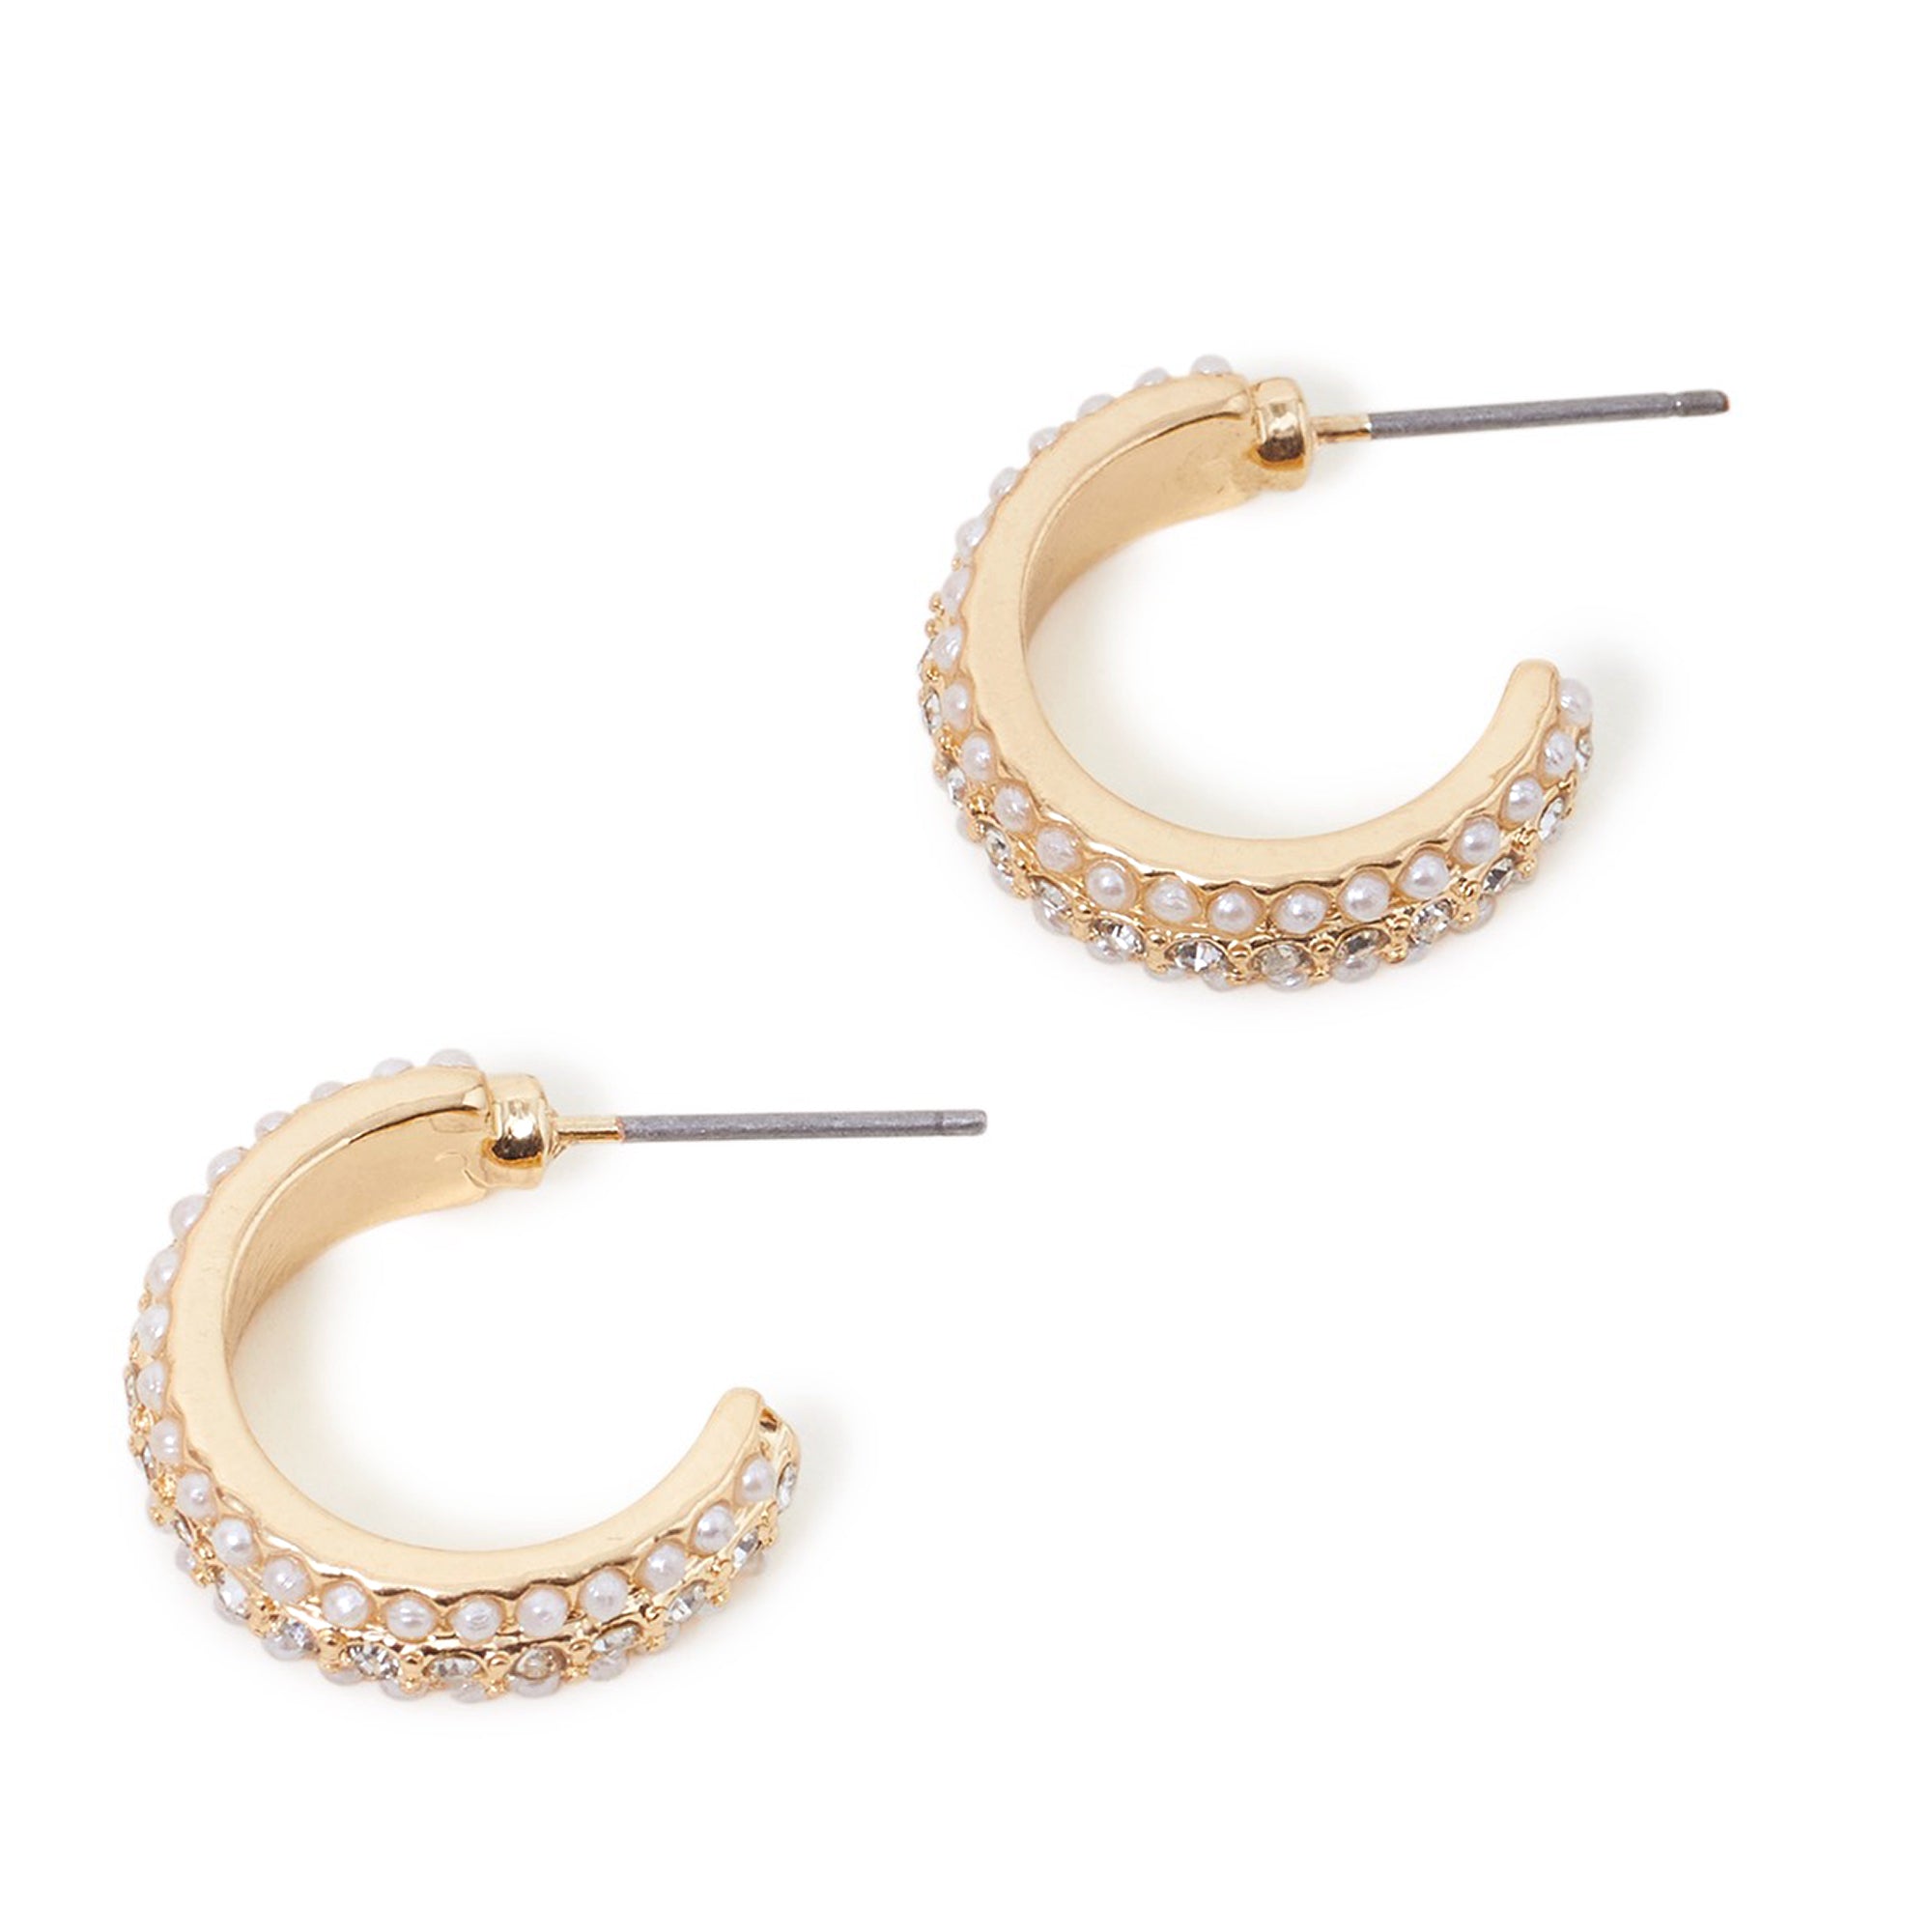 Accessorize London Women's Pearl And Crystal Hoop Earring